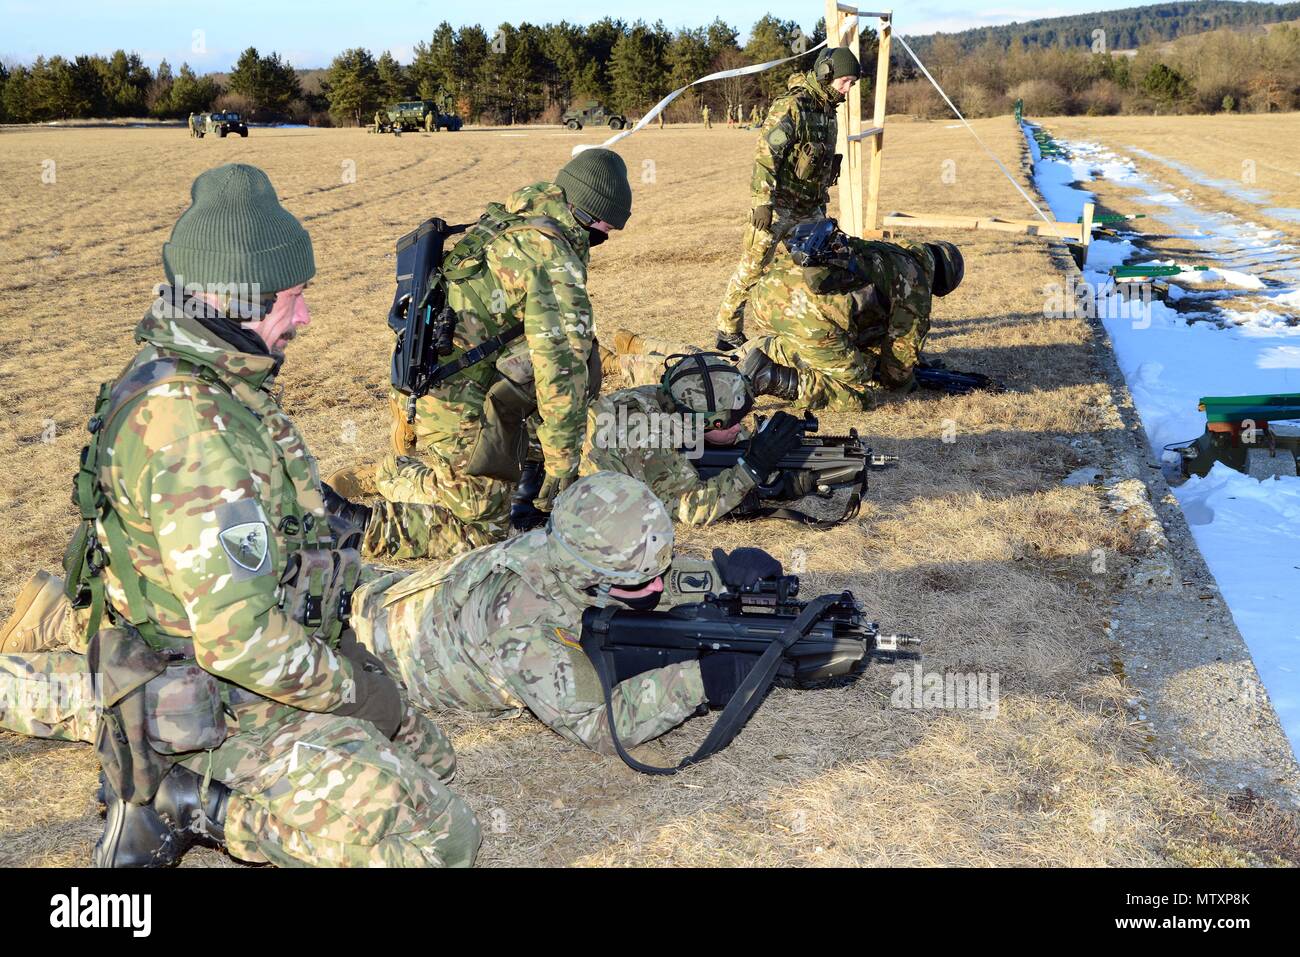 U.S. Army paratroopers from the 173rd Brigade Support Battalion, 173rd Airborne Brigade and Slovenian soldiers cross-train on the M4 carbine rifles and FN2000 assault rifles during exercise Lipizzaner III in Bac, Slovenia, on Jan. 26, 2017. Lipizzaner is a combined squad-level training exercise in preparation for platoon evaluation, and to validate battalion-level deployment procedures. (Photo by Visual Information Specialist Massimo Bovo/released) Stock Photo